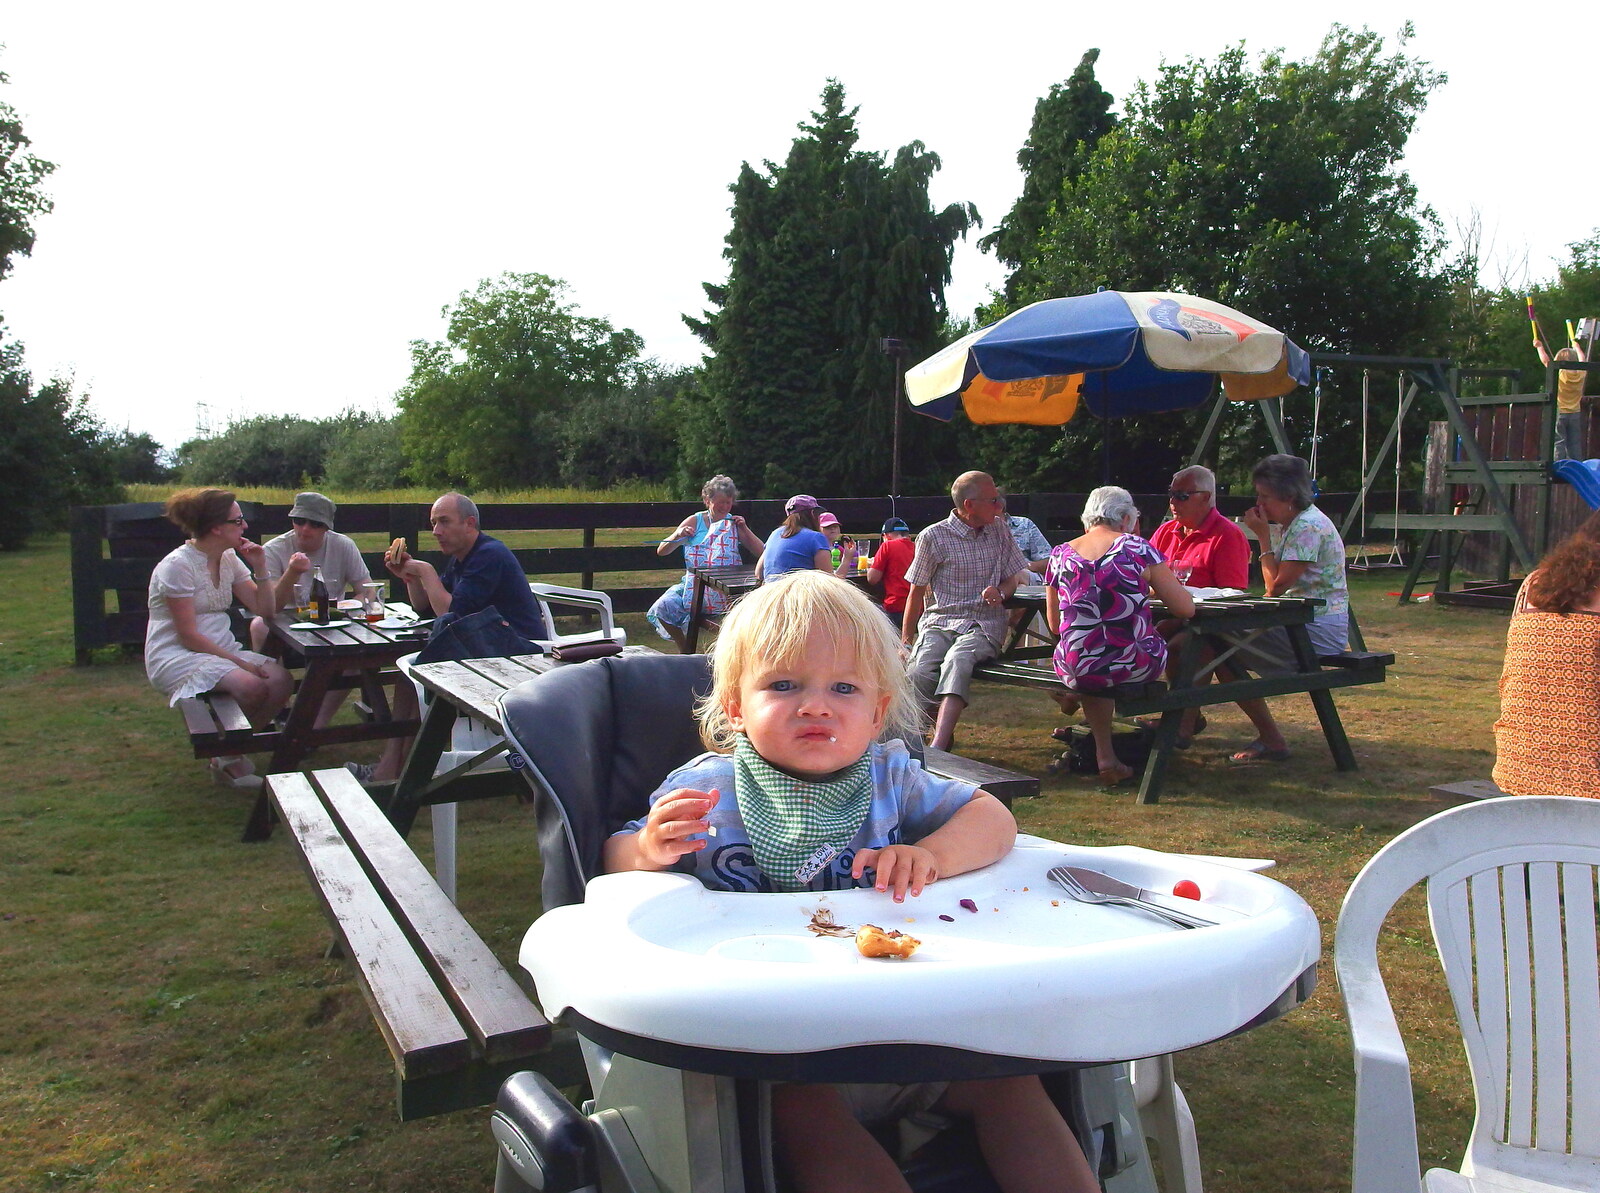 Harry in a high chair from The BSCC at Walpole, and a Swan Inn Barbeque, Brome, Suffolk - 4th August 2013